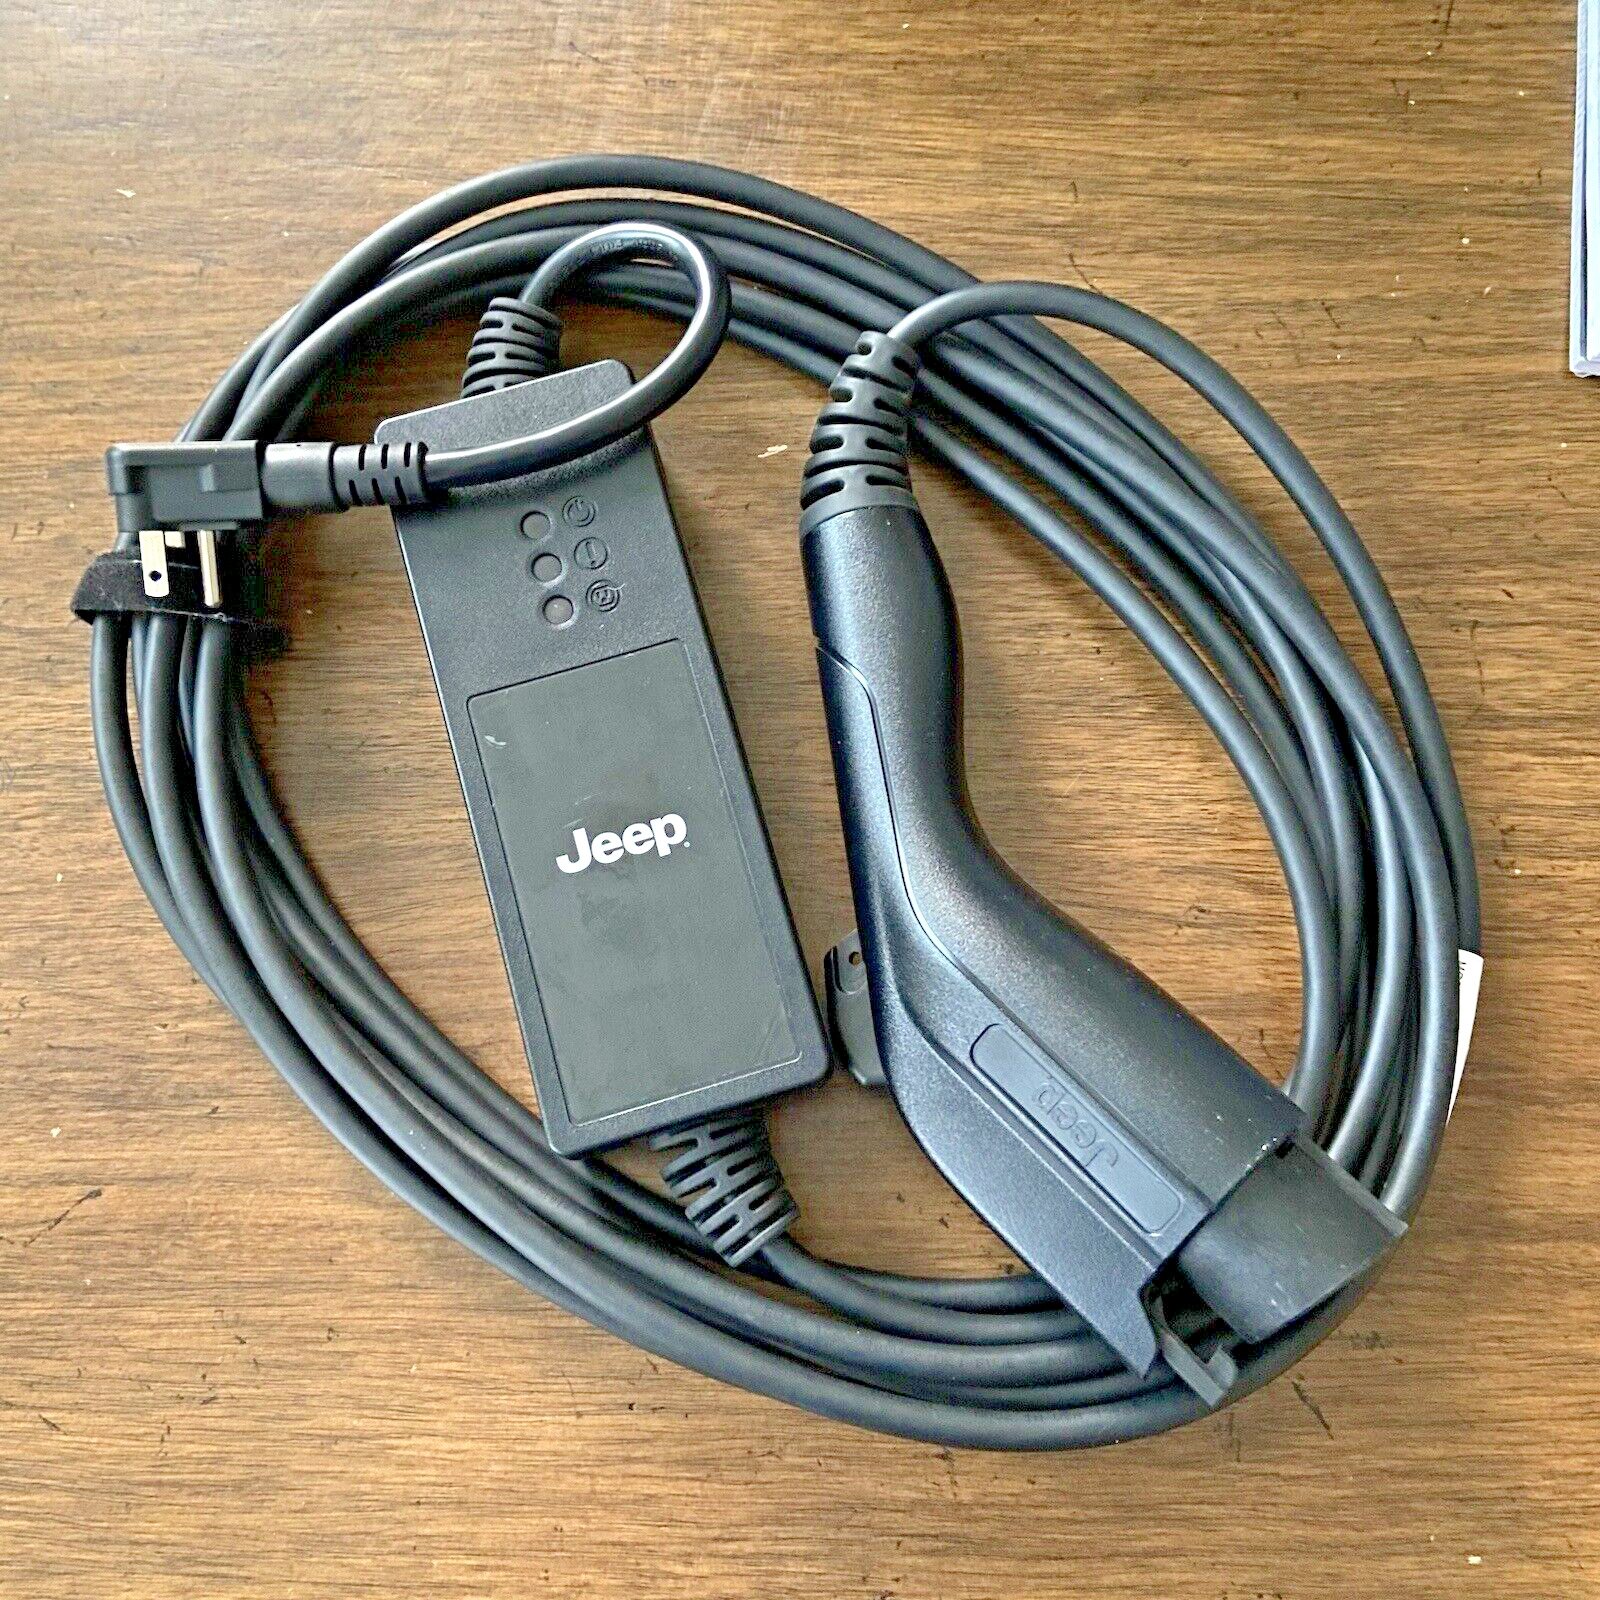 Jeep EV Charger Wrangler Rubicon Willys 4XE Grand Cherokee charging cable PHEV